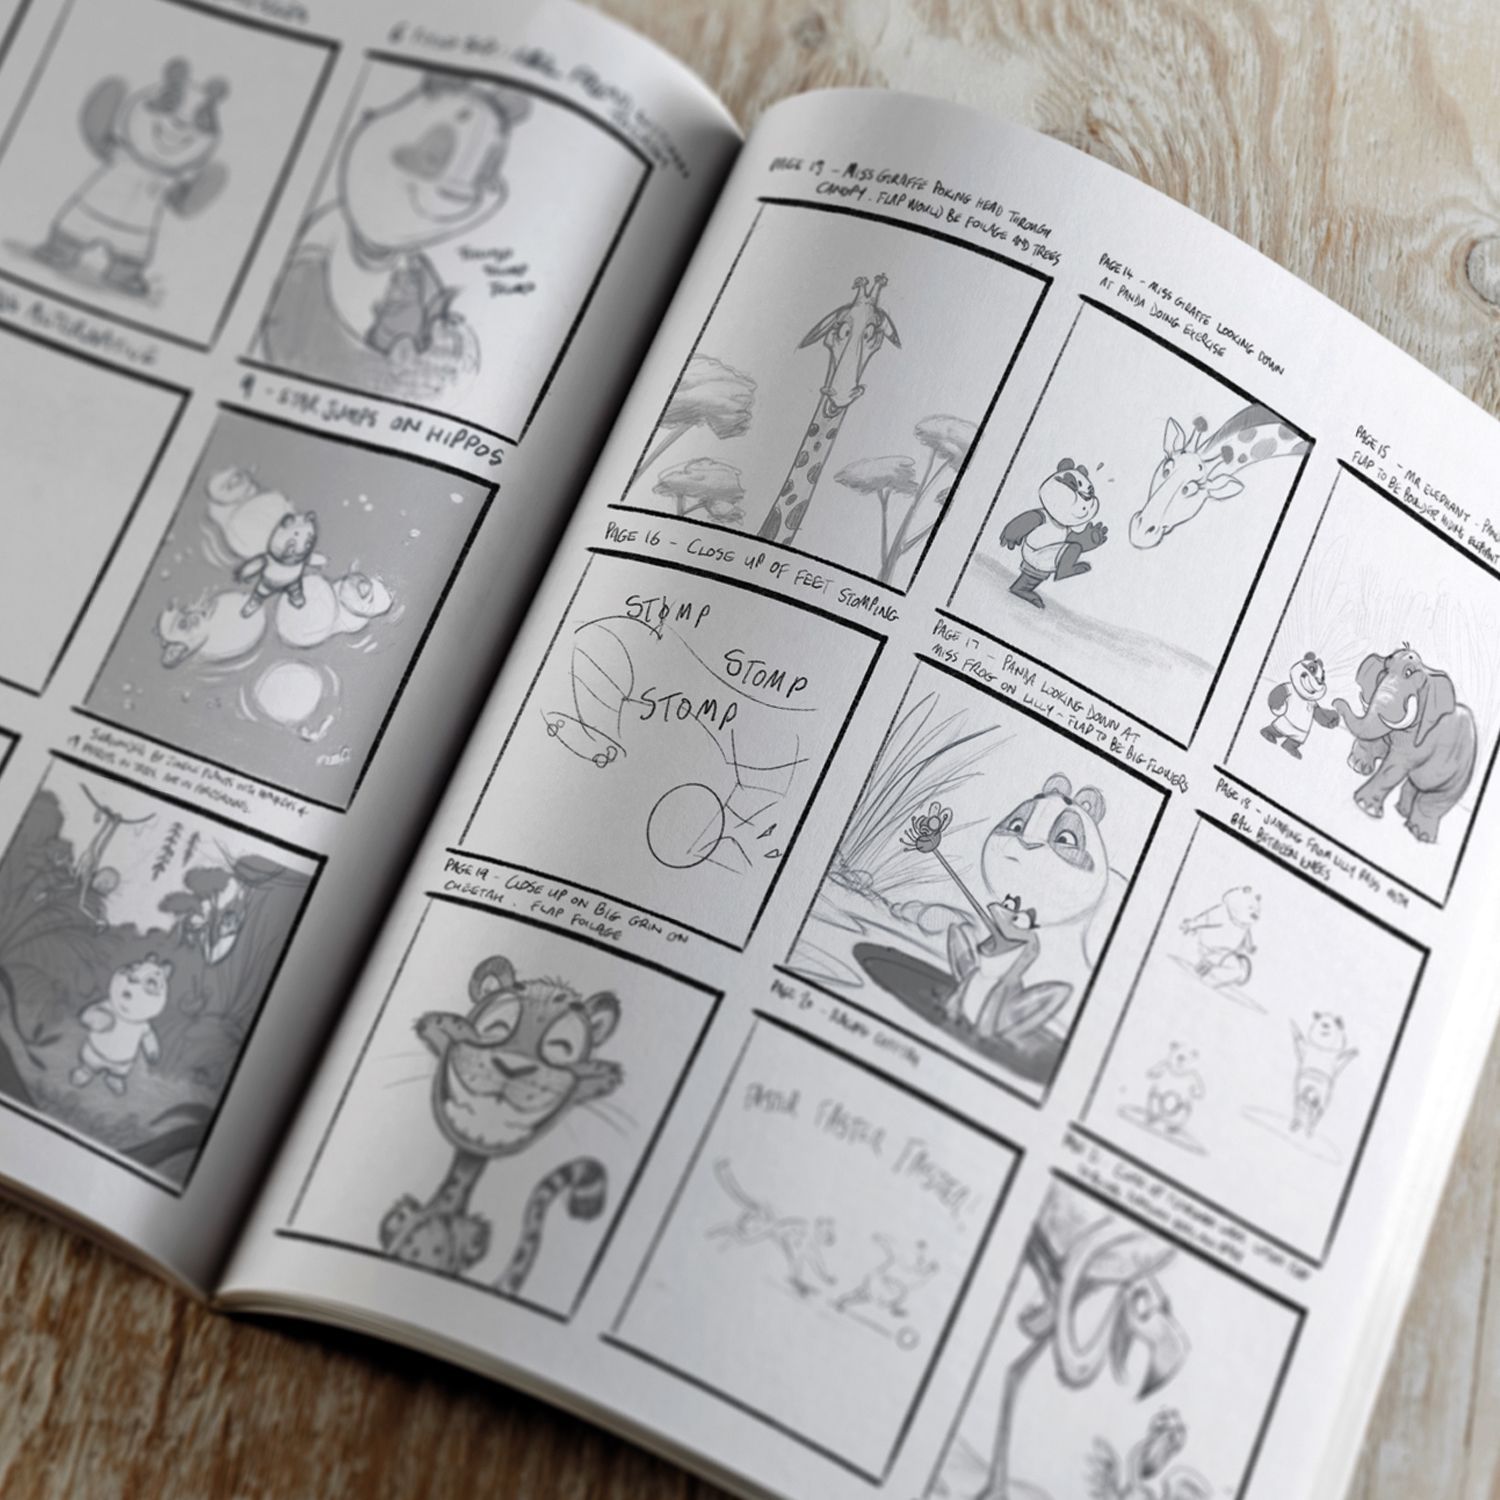 Lets Move Children's book illustrations  Storyboard